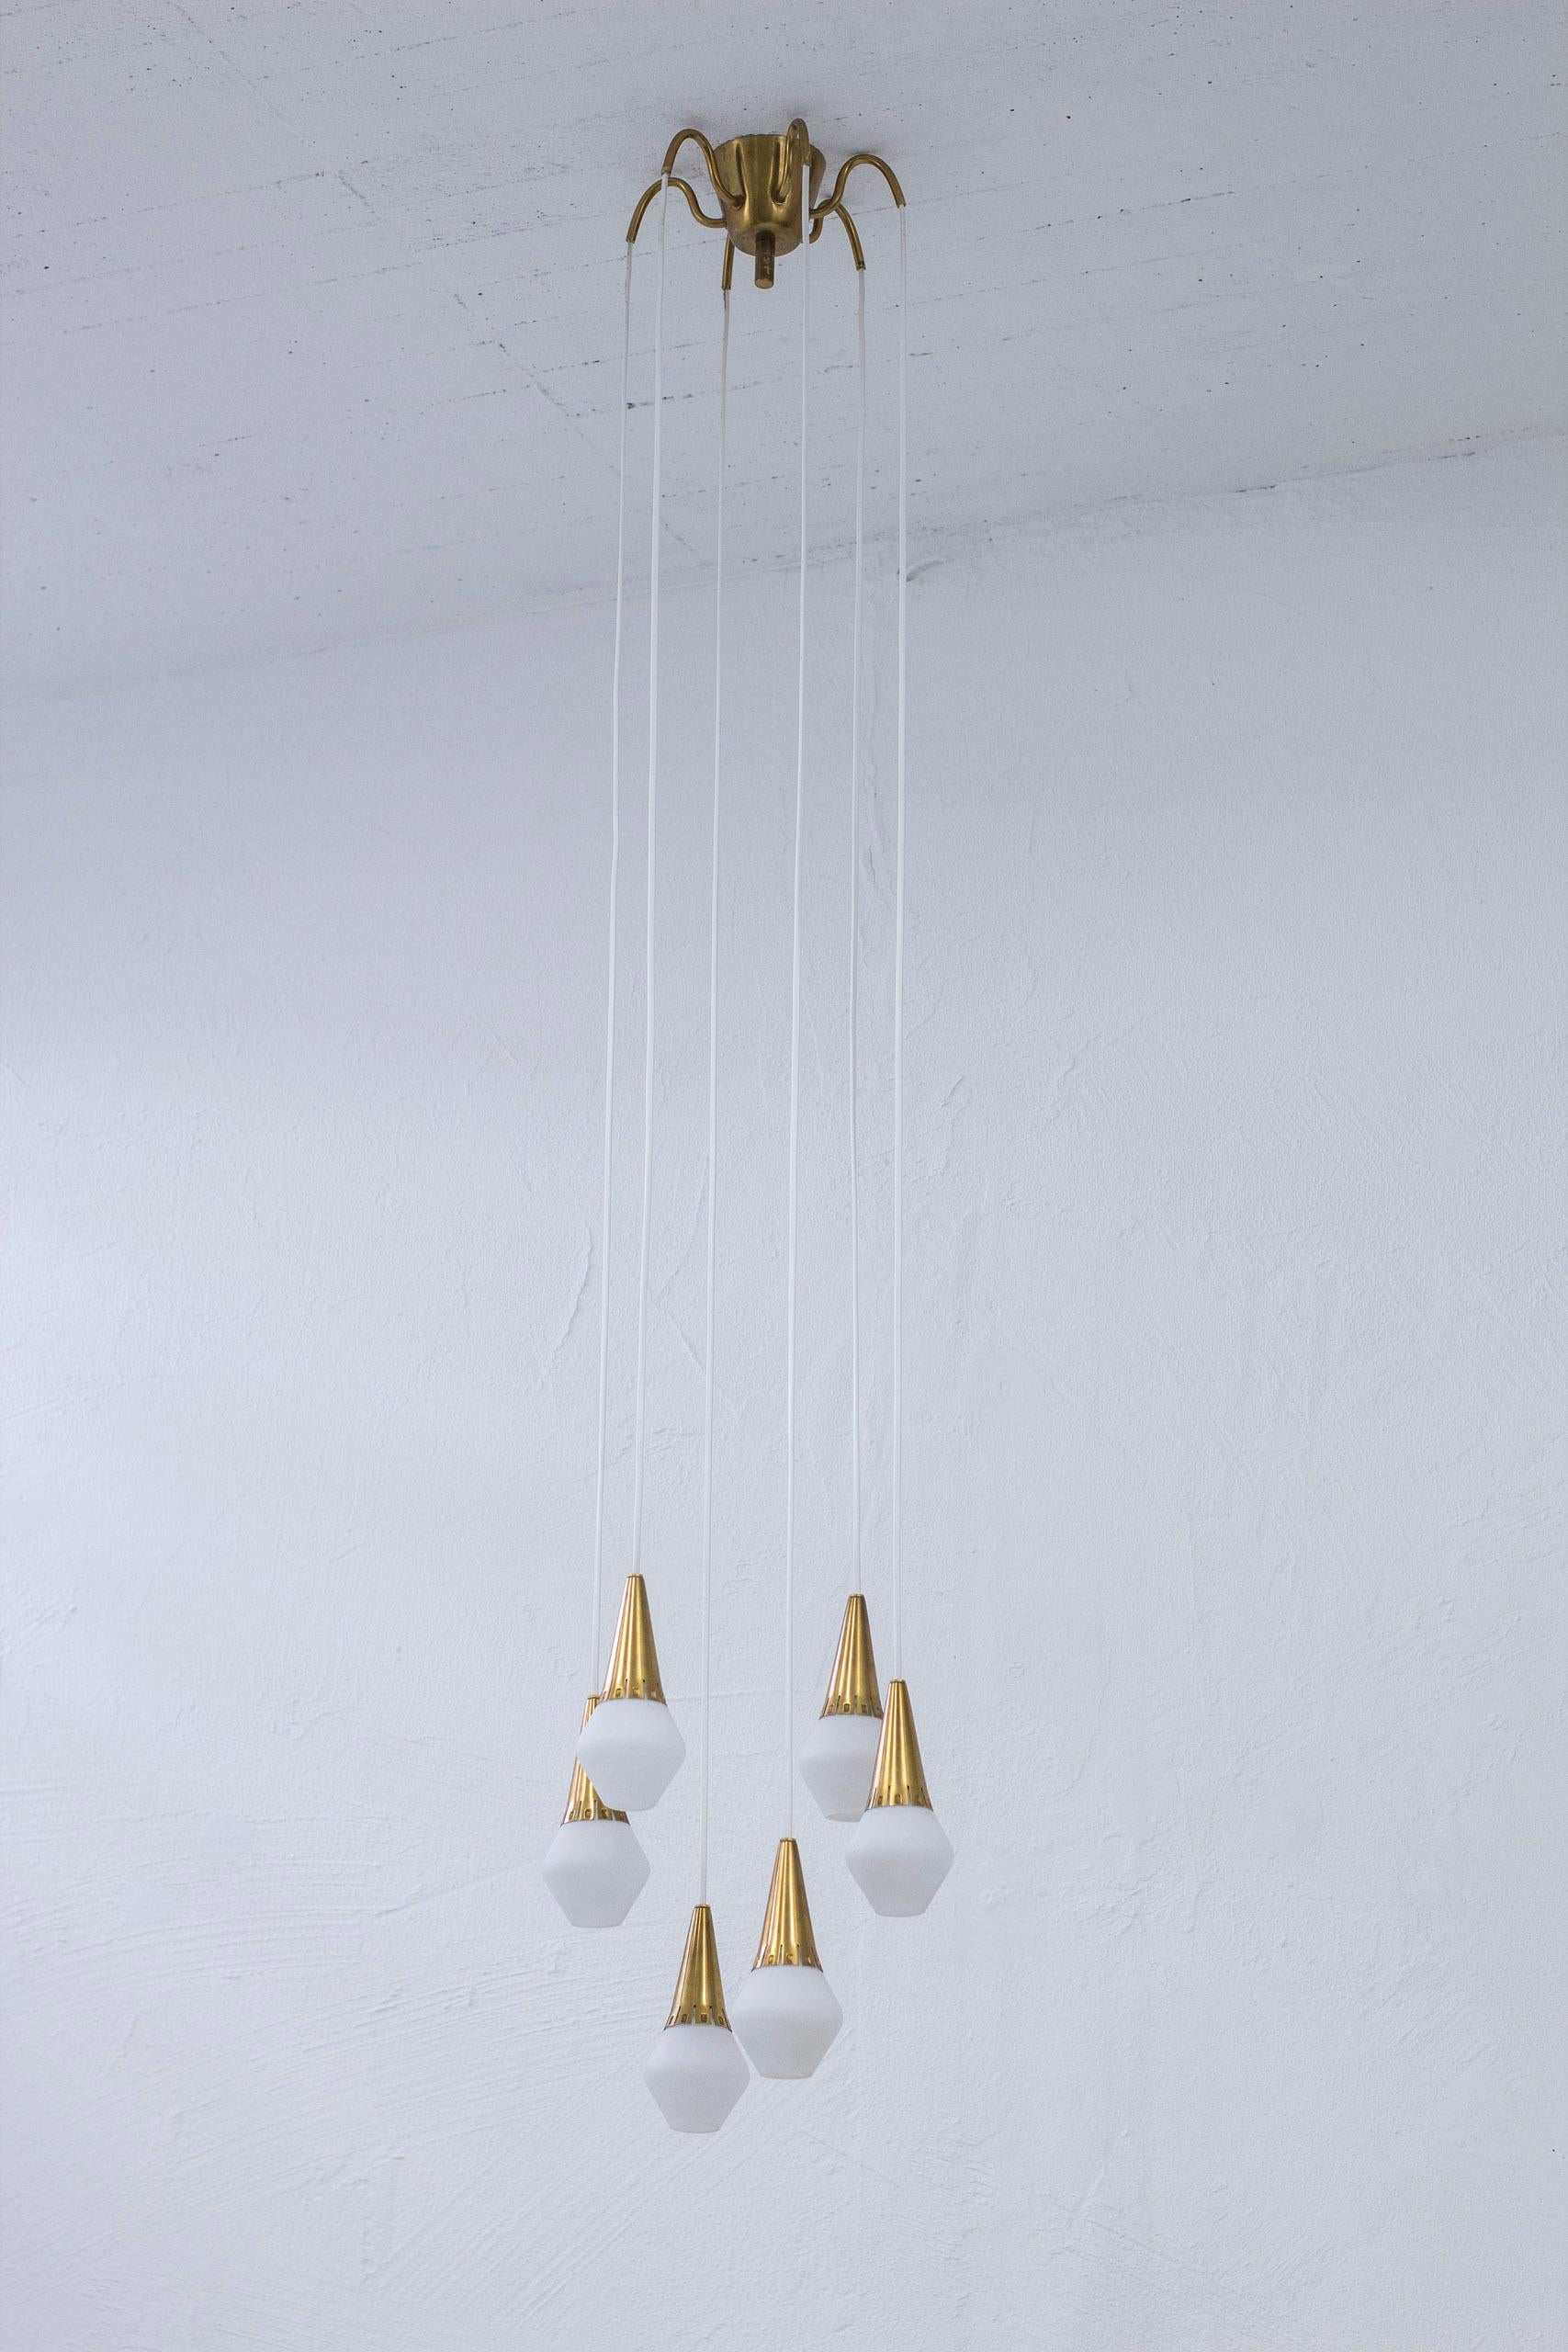 Scandinavian Modern Ceiling Pendant in Brass and Opal Glass by Harald Notini for Böhlmarks, 1950s For Sale